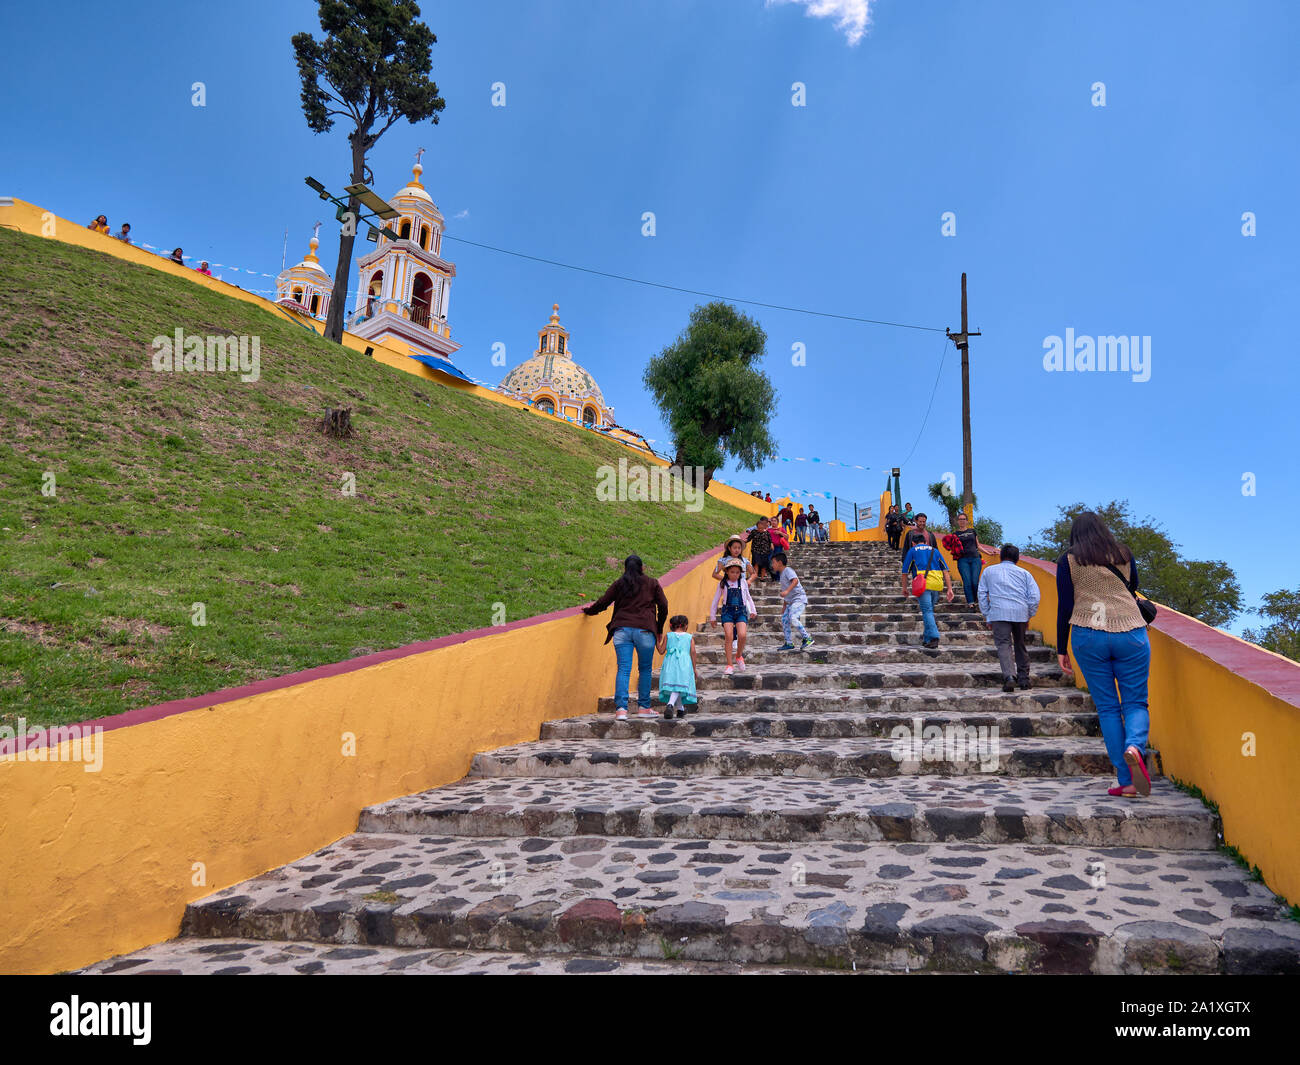 San Pedro Cholula, Mexico, September 30, 2018 - Ascent ladder for the Shrine of Our Lady of Remedies sanctuary with tourist and blue sky. Stock Photo